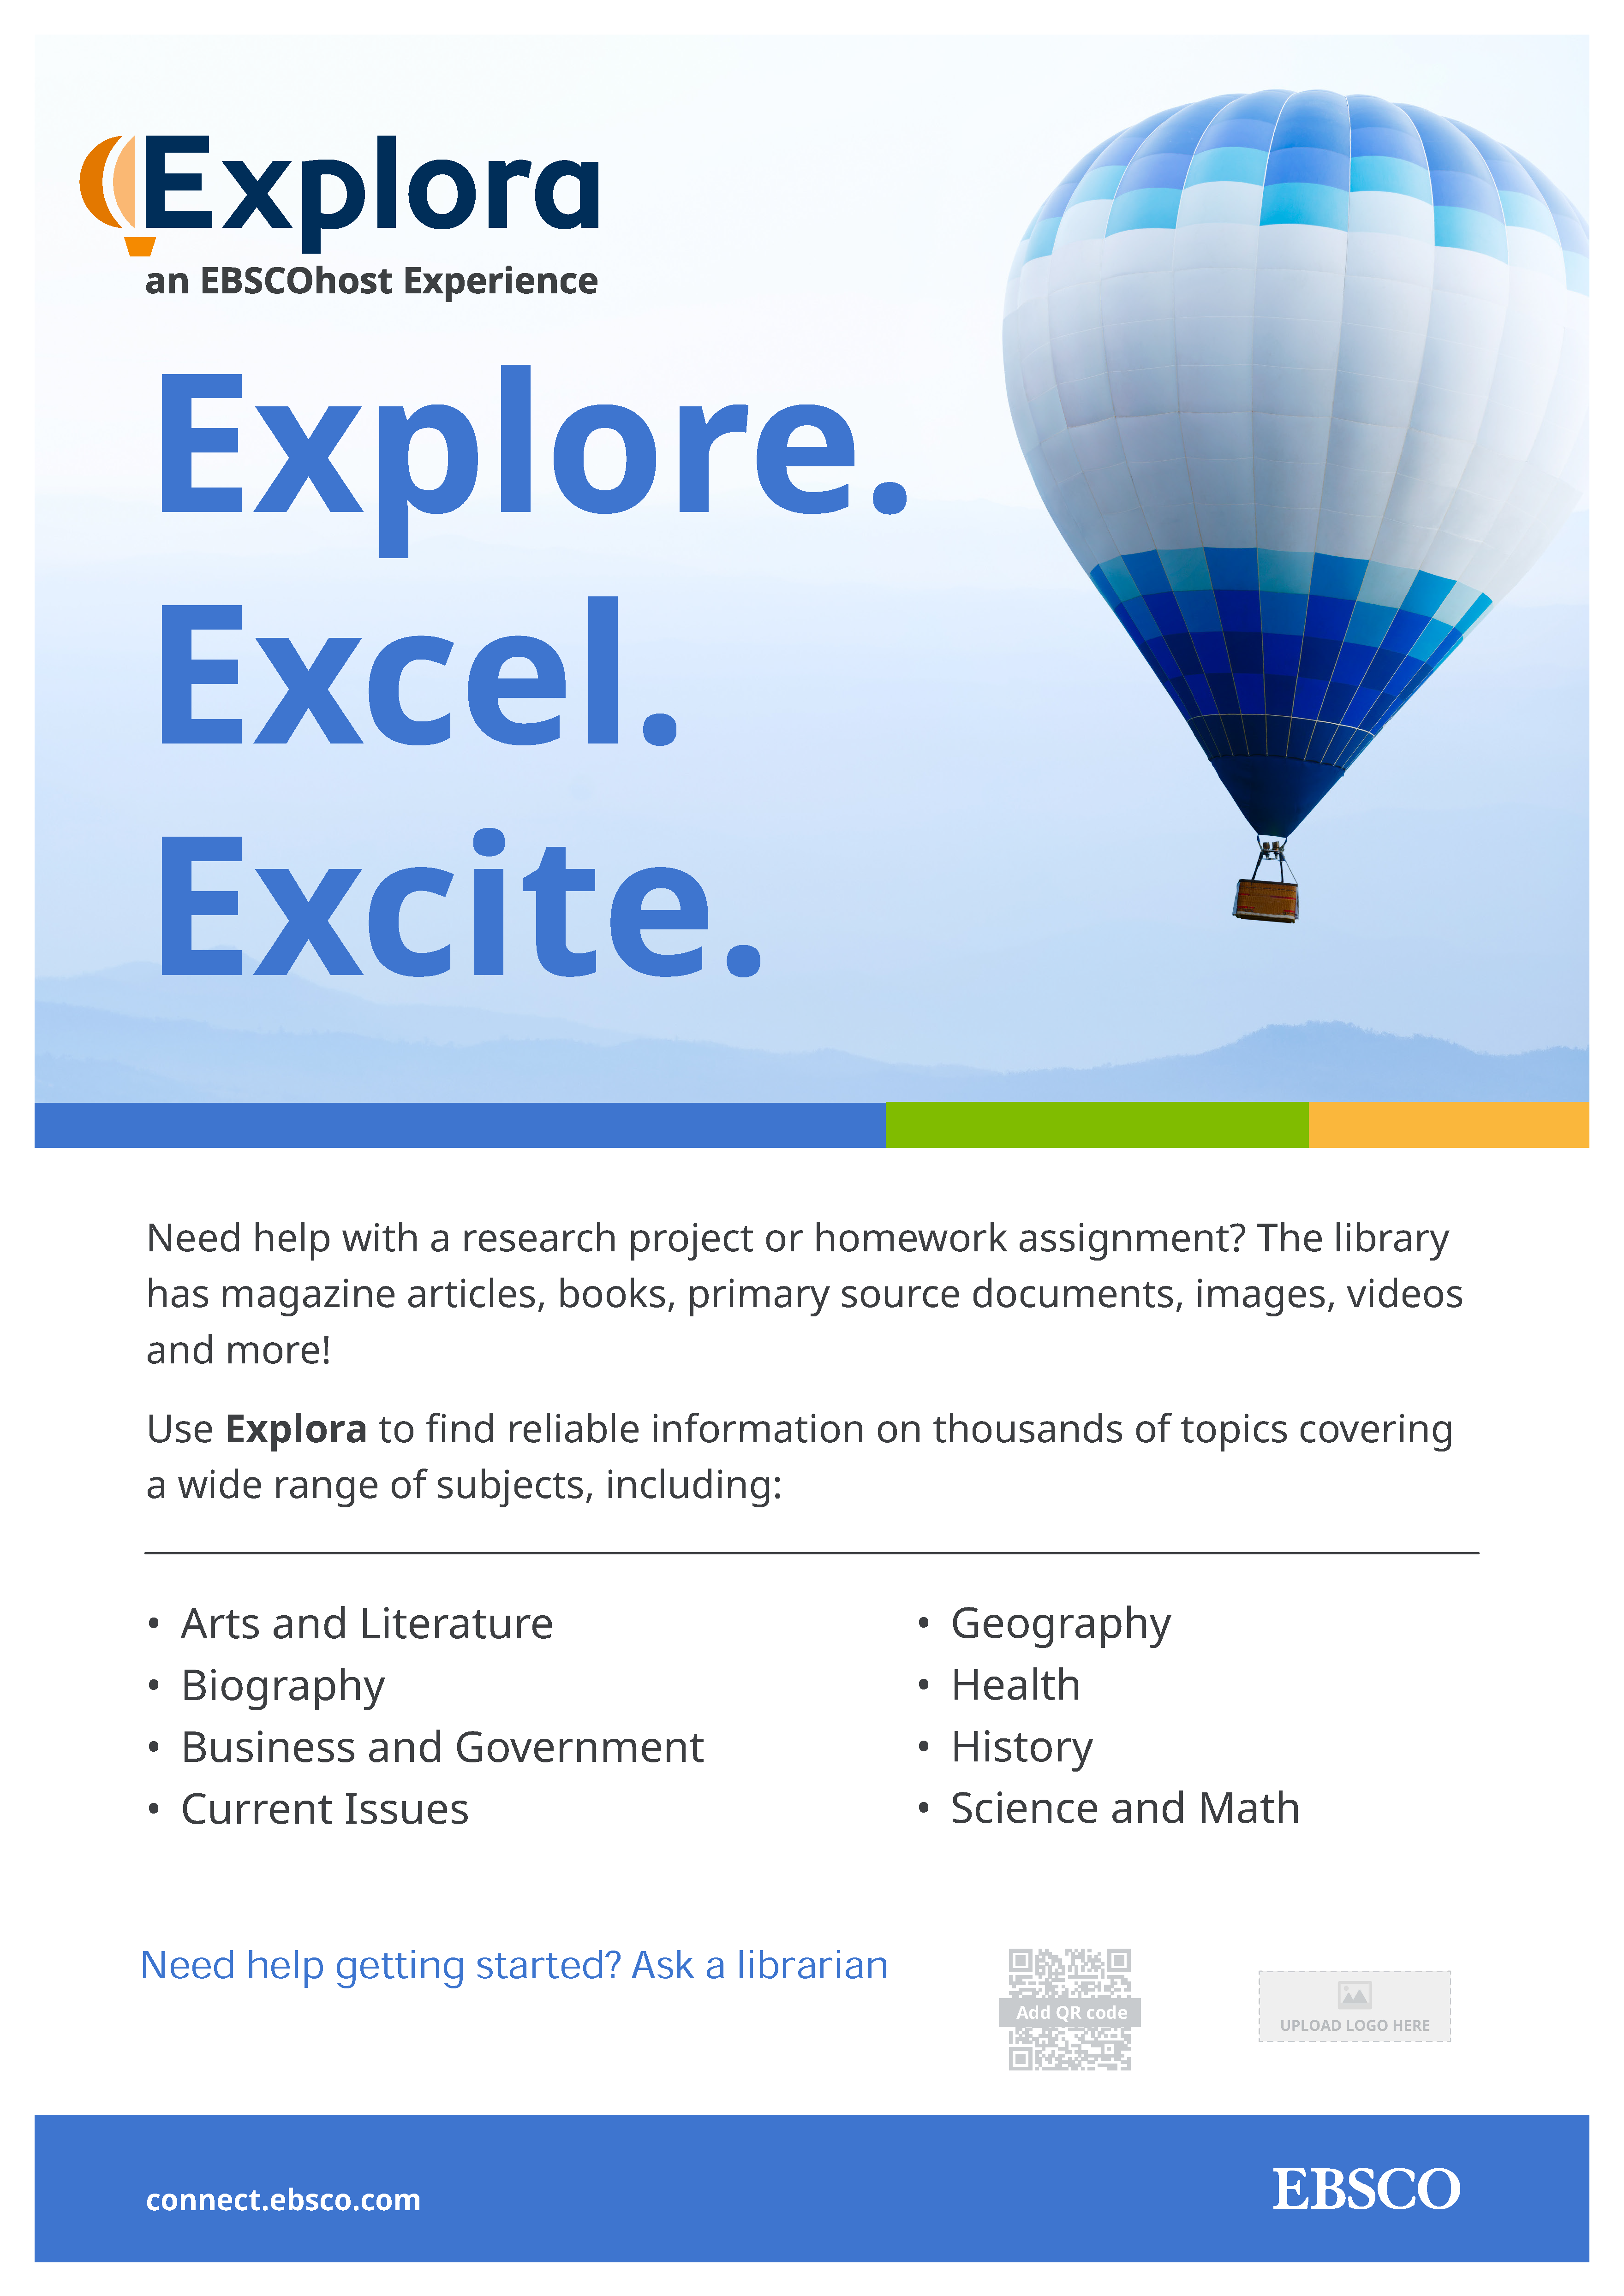 A blue and white Explora poster with a hot air balloon and the text "Explore, Excel, Excite."